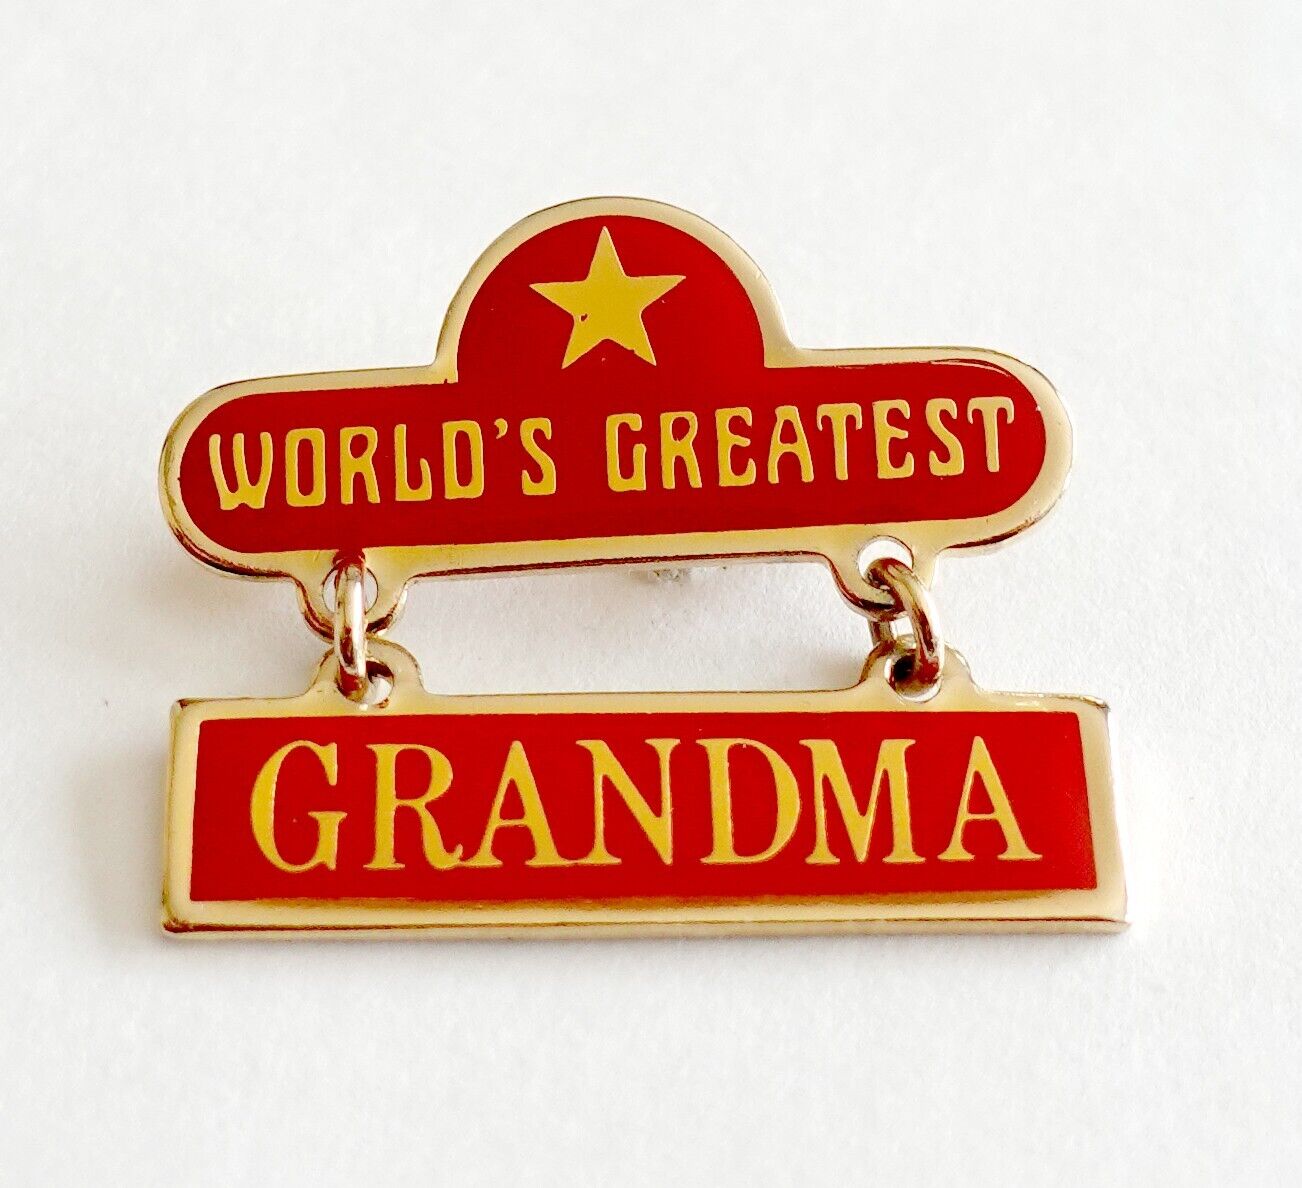 Vintage Worlds Greatest Grandma Lapel Pin Brooch Red Gold Tones Gift for Her